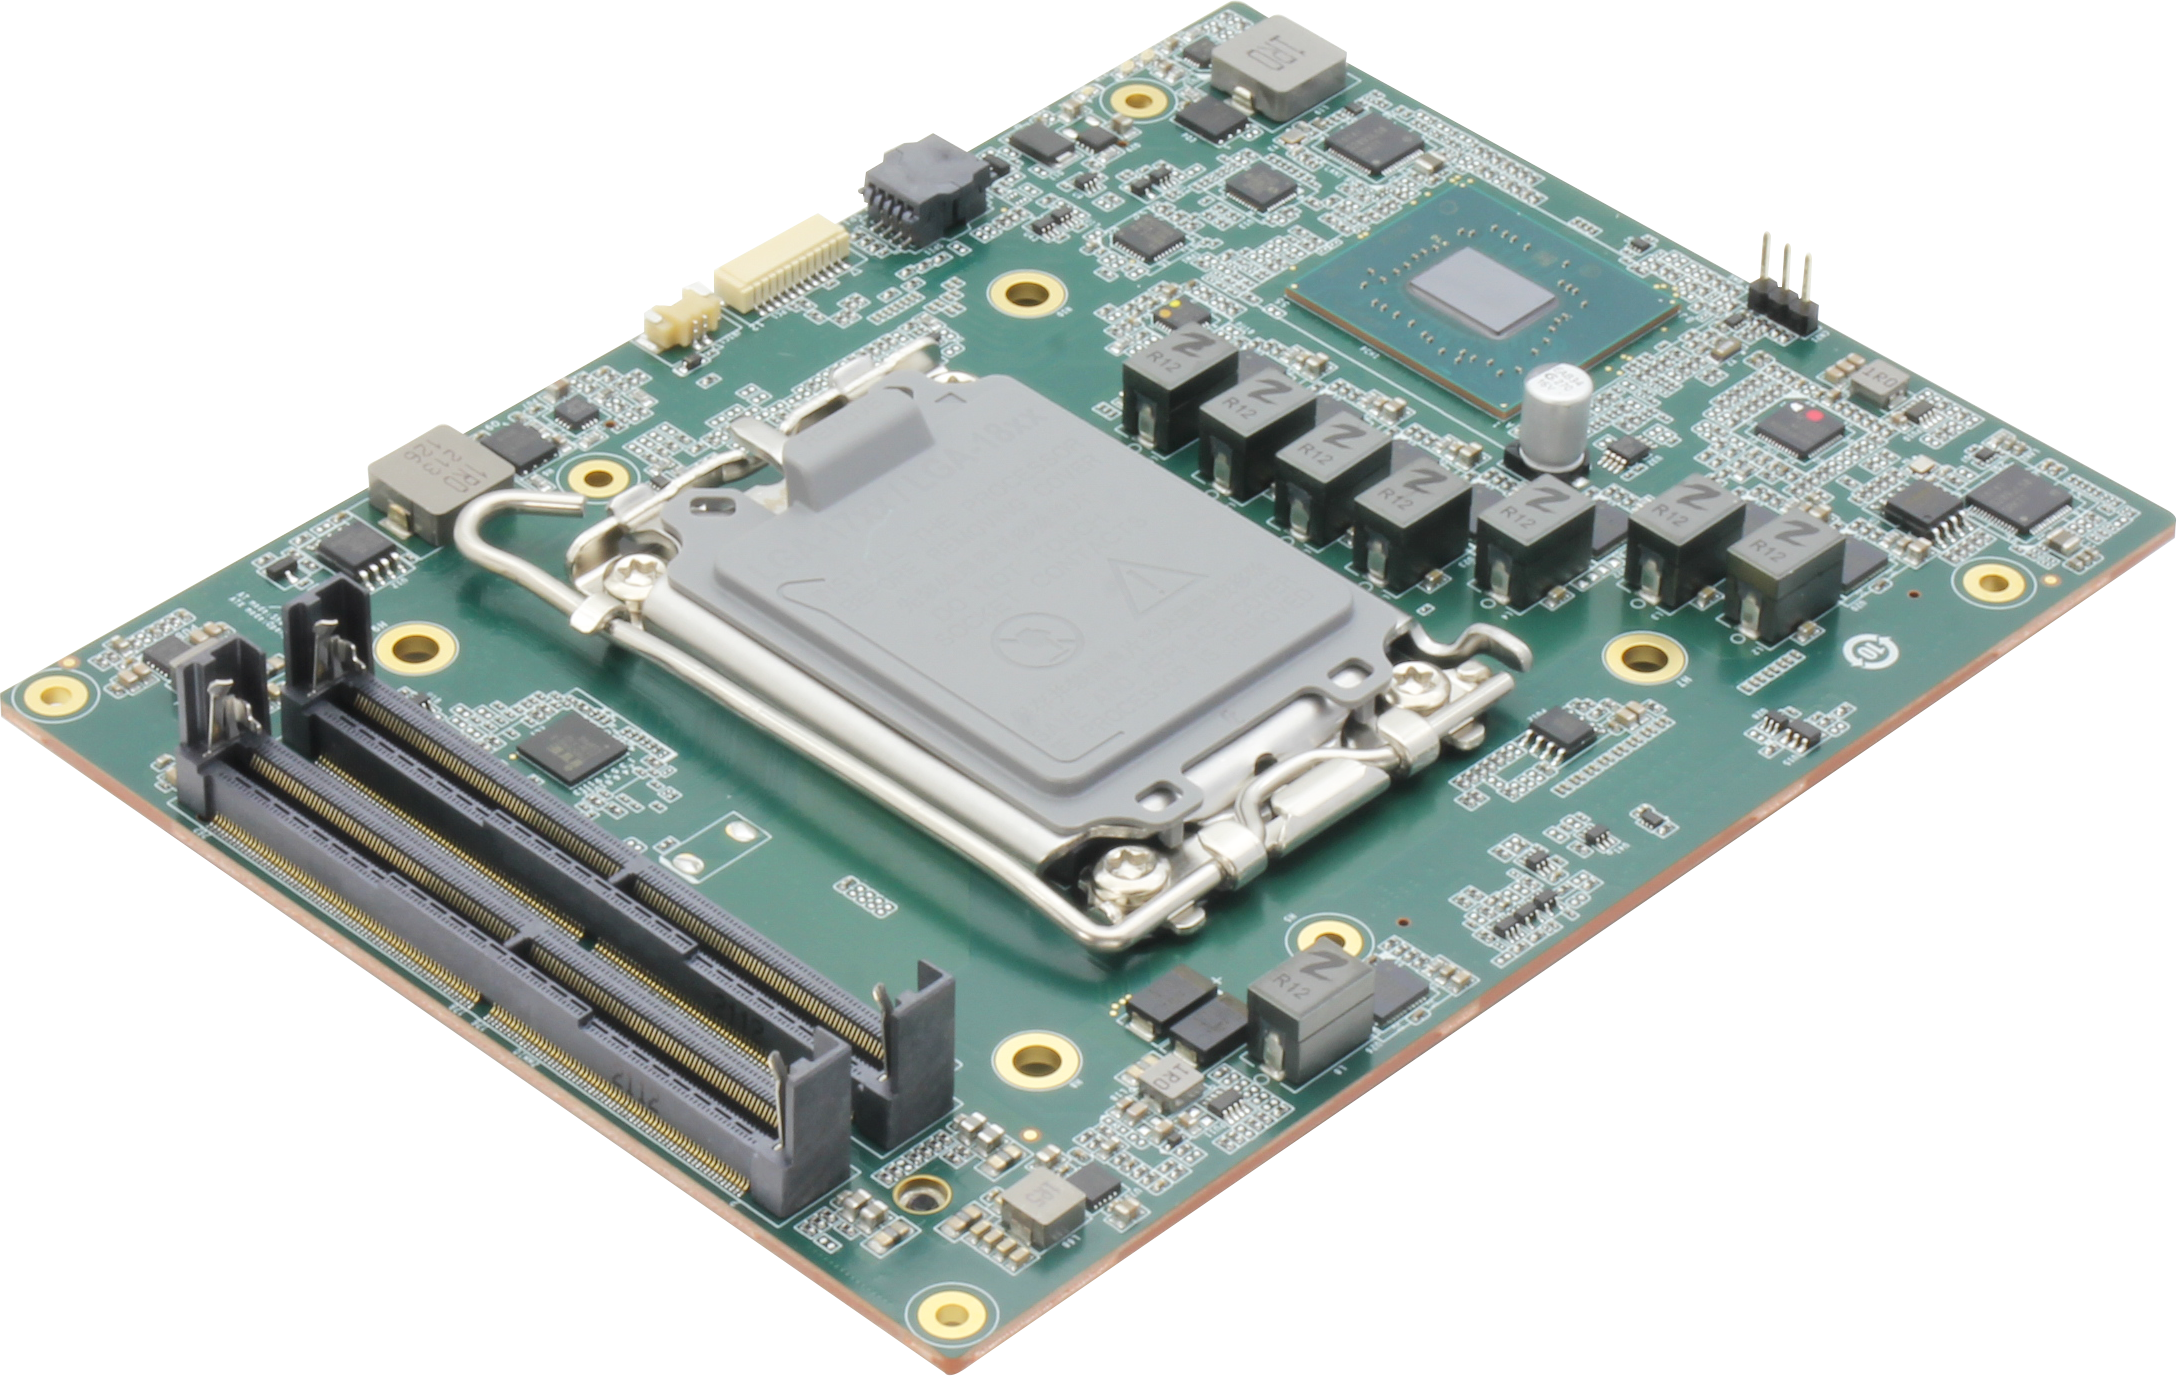 AAEON Release COM-HPC Boards with Multiple SuperSpeed USB 20Gbps, 11 PCIe, and 12th/13th Gen Intel Core CPU Support